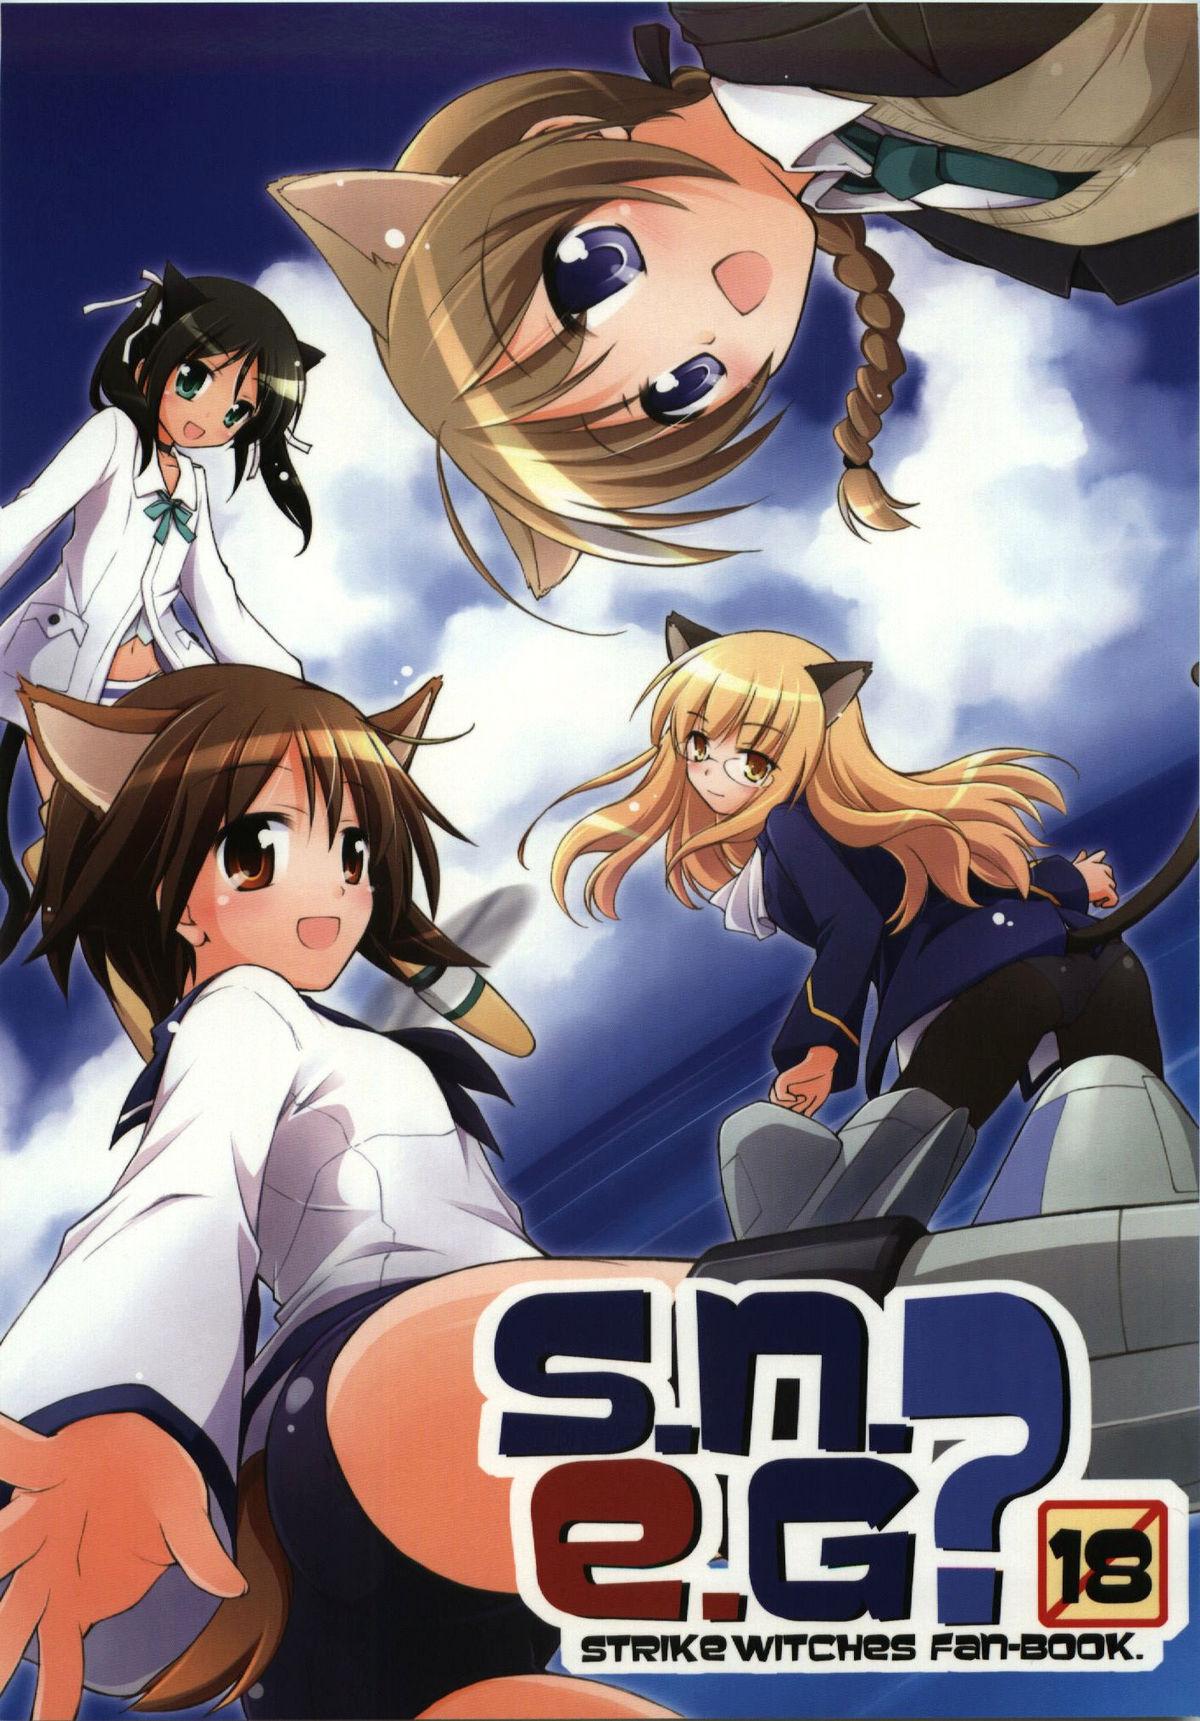 Blowjob s.n.e.g? - Strike witches Flaca - Page 1